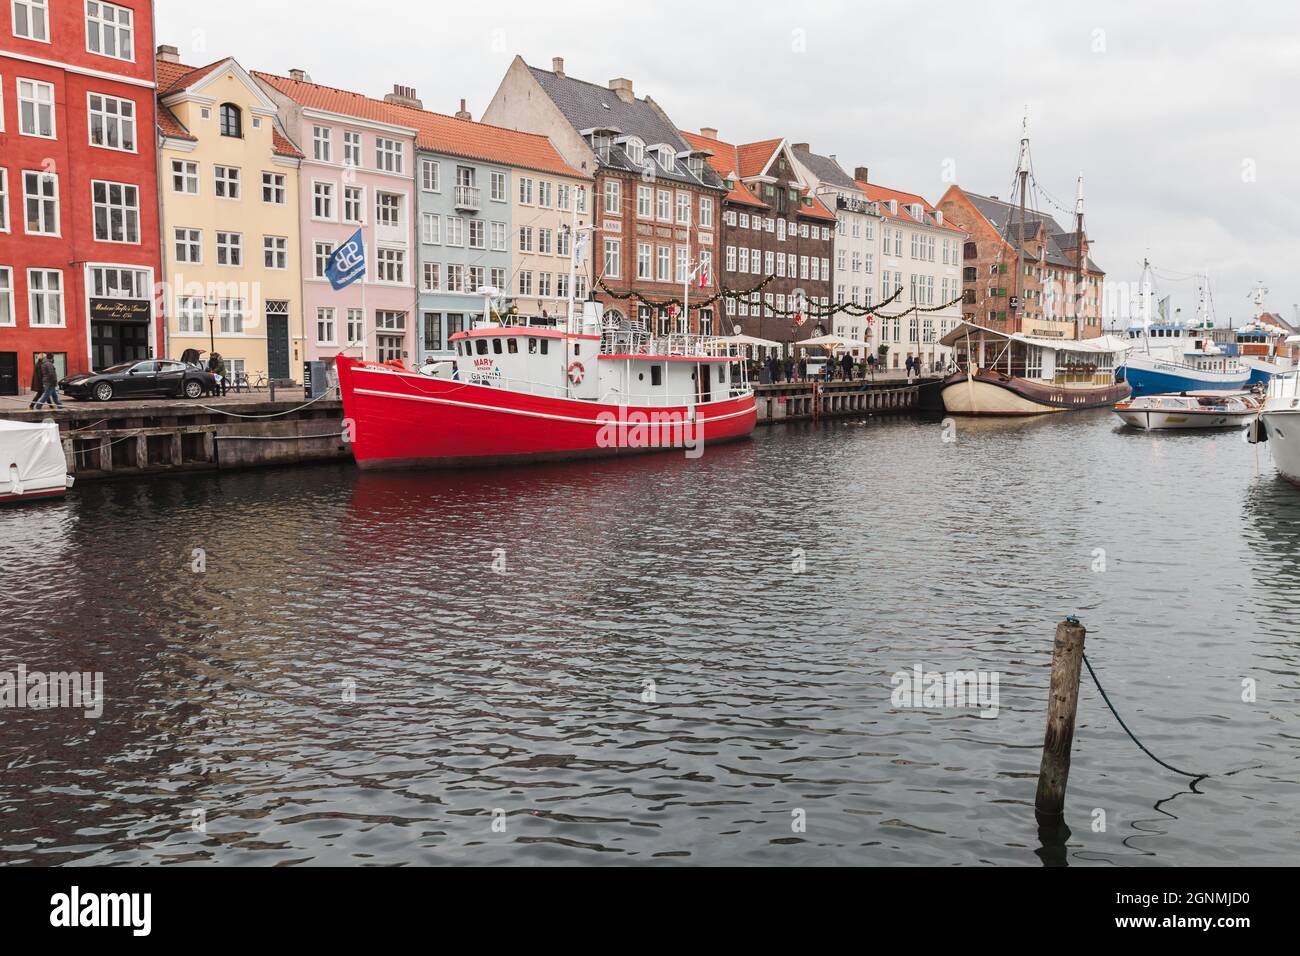 Copenhagen, Denmark - December 10, 2017: Coastal view of Nyhavn or New Harbour, it is a 17th-century waterfront, canal and popular touristic district Stock Photo